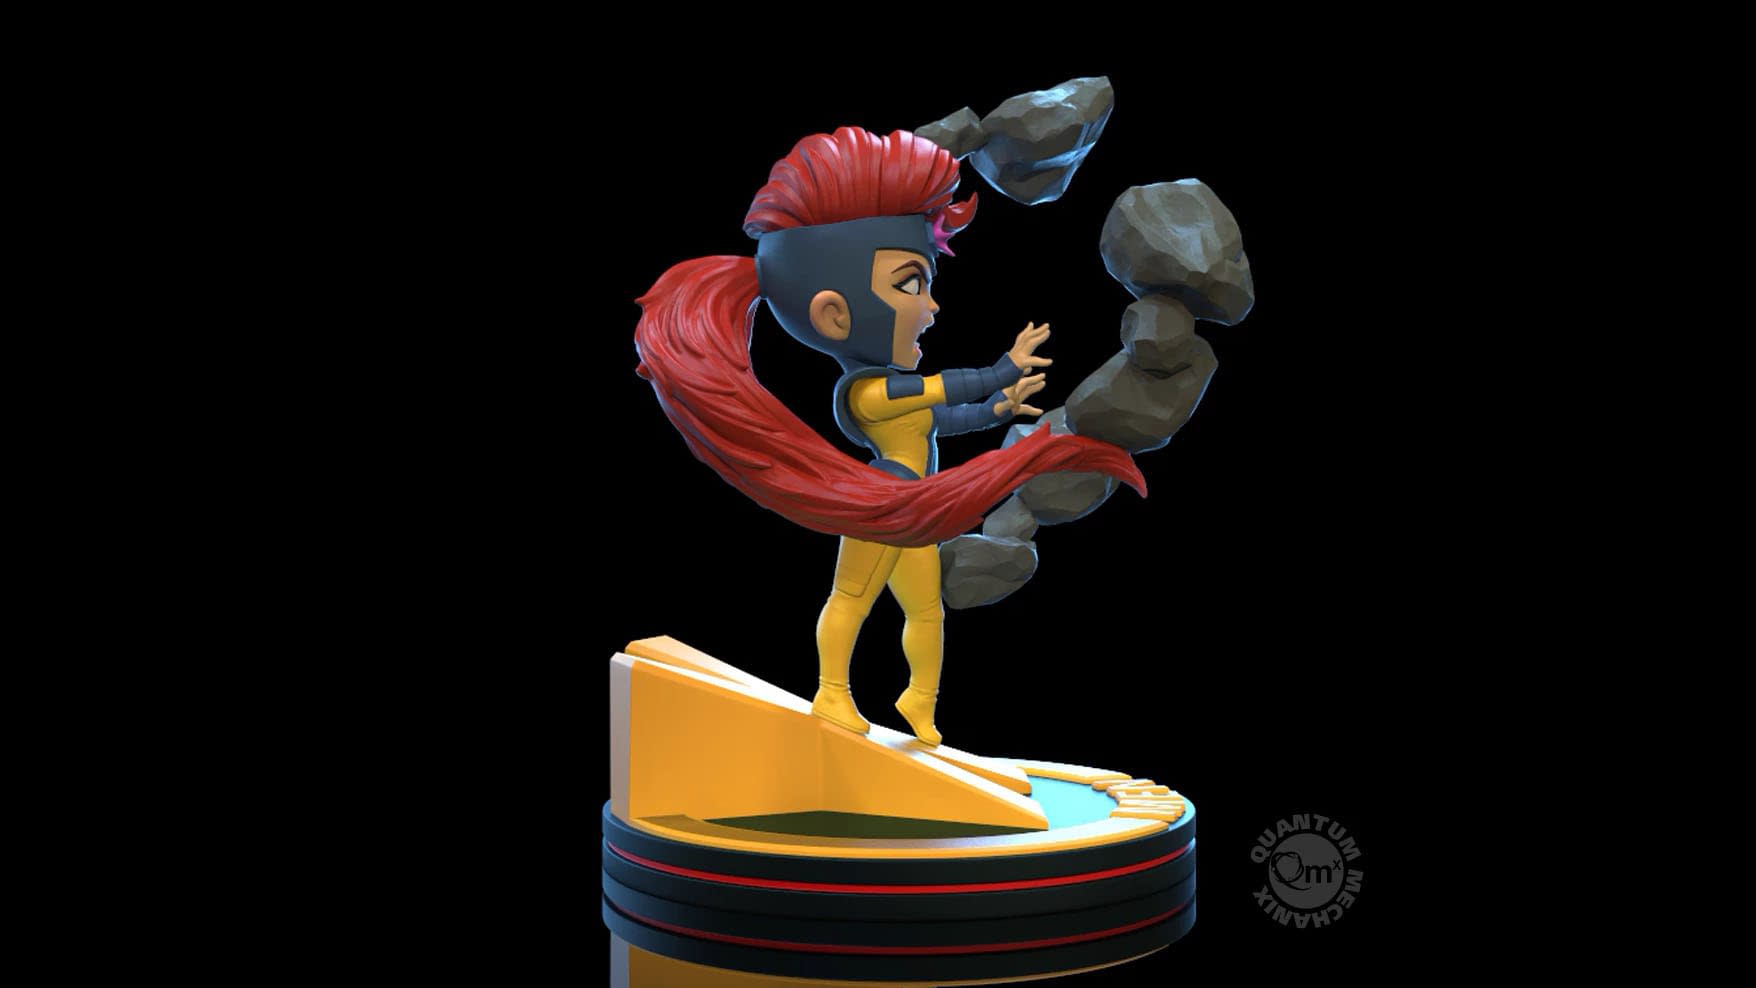 The X-Men Are Here to Save the Day with New Q-Fig Figures 